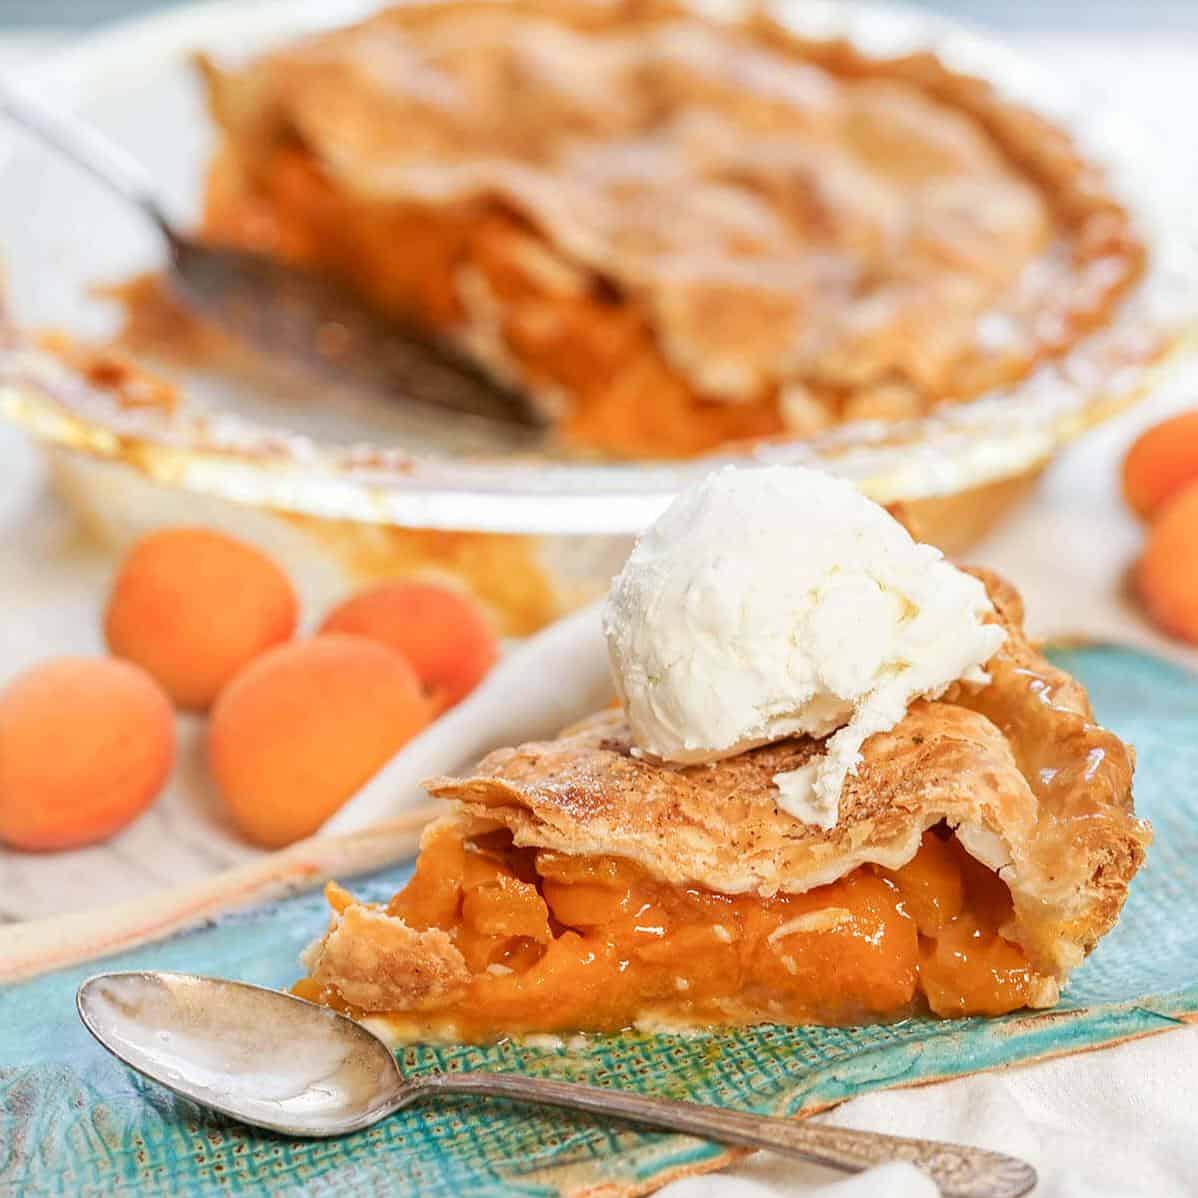  This is the pie that dreams are made of, Apricot Sour Cream Pie